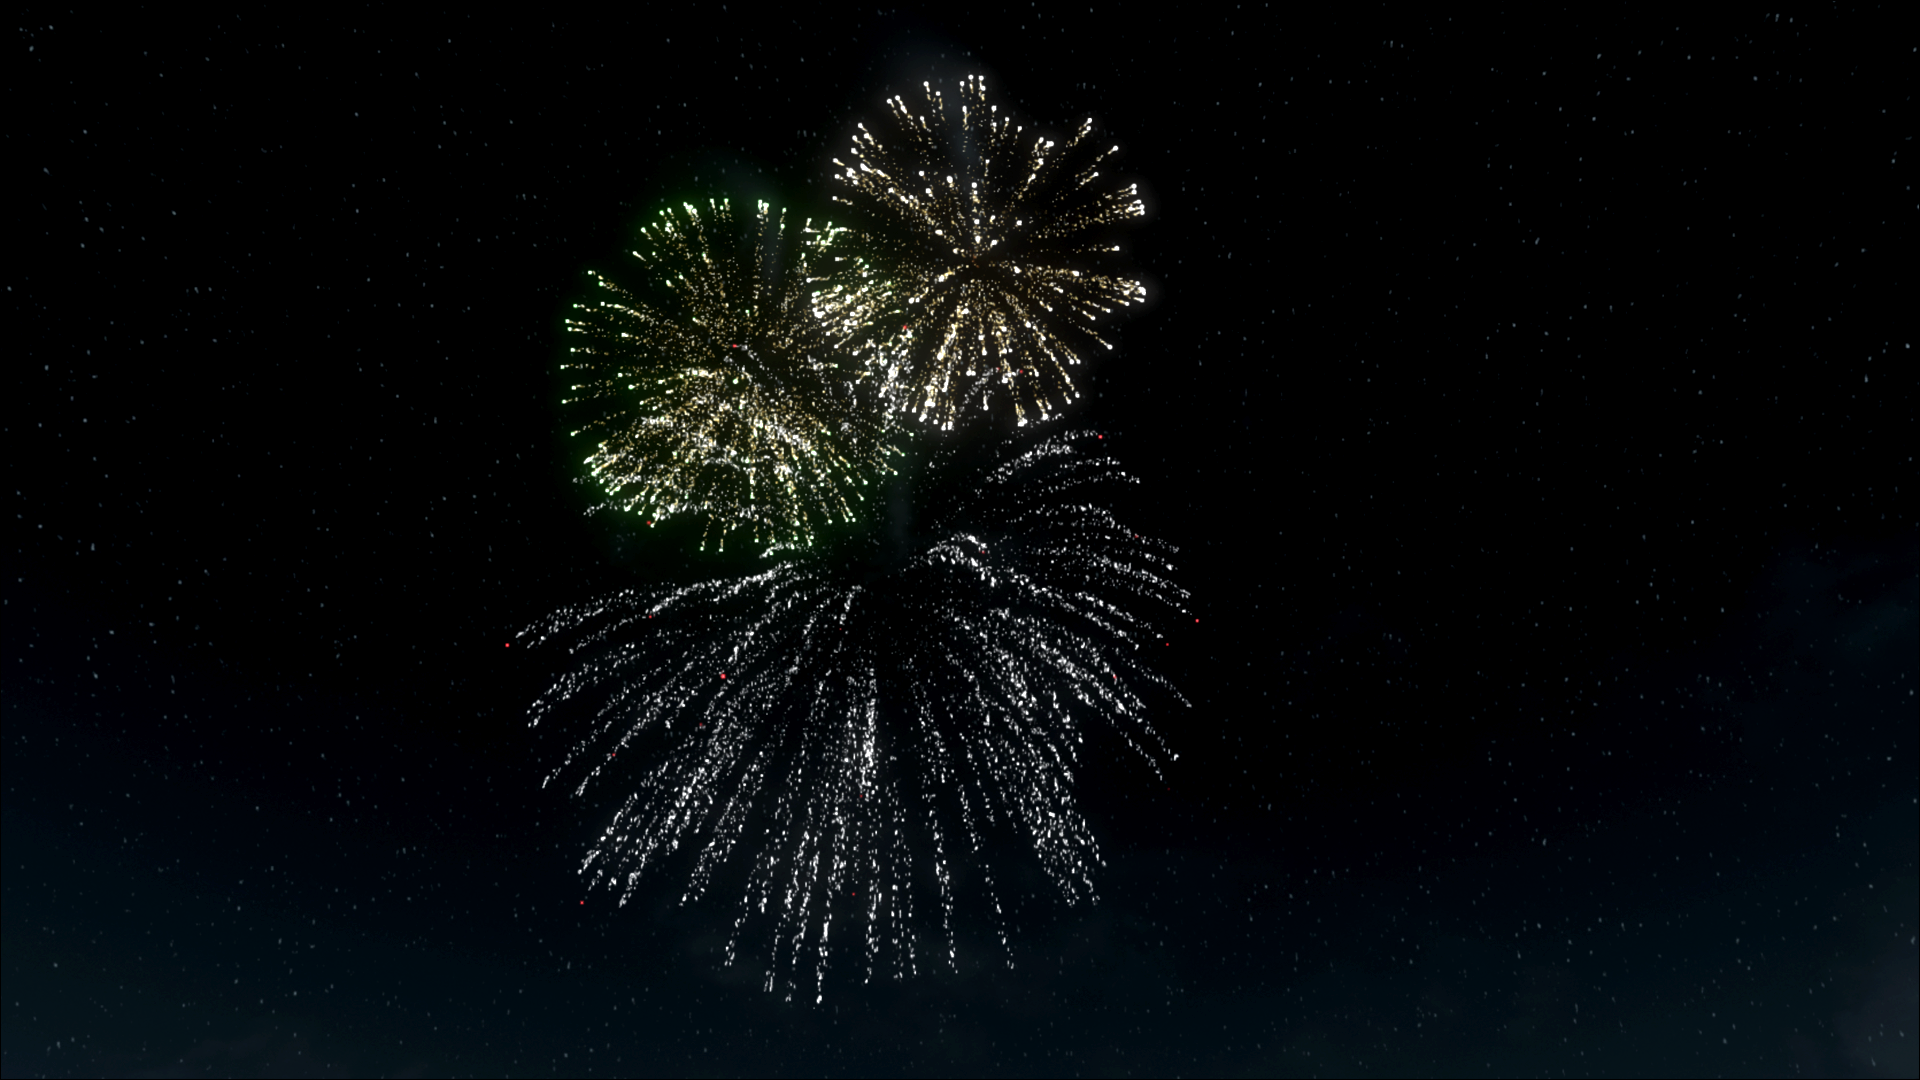 Fireworks Particle Effects by Tom Shannon LLC in FX - UE4 Marketplace